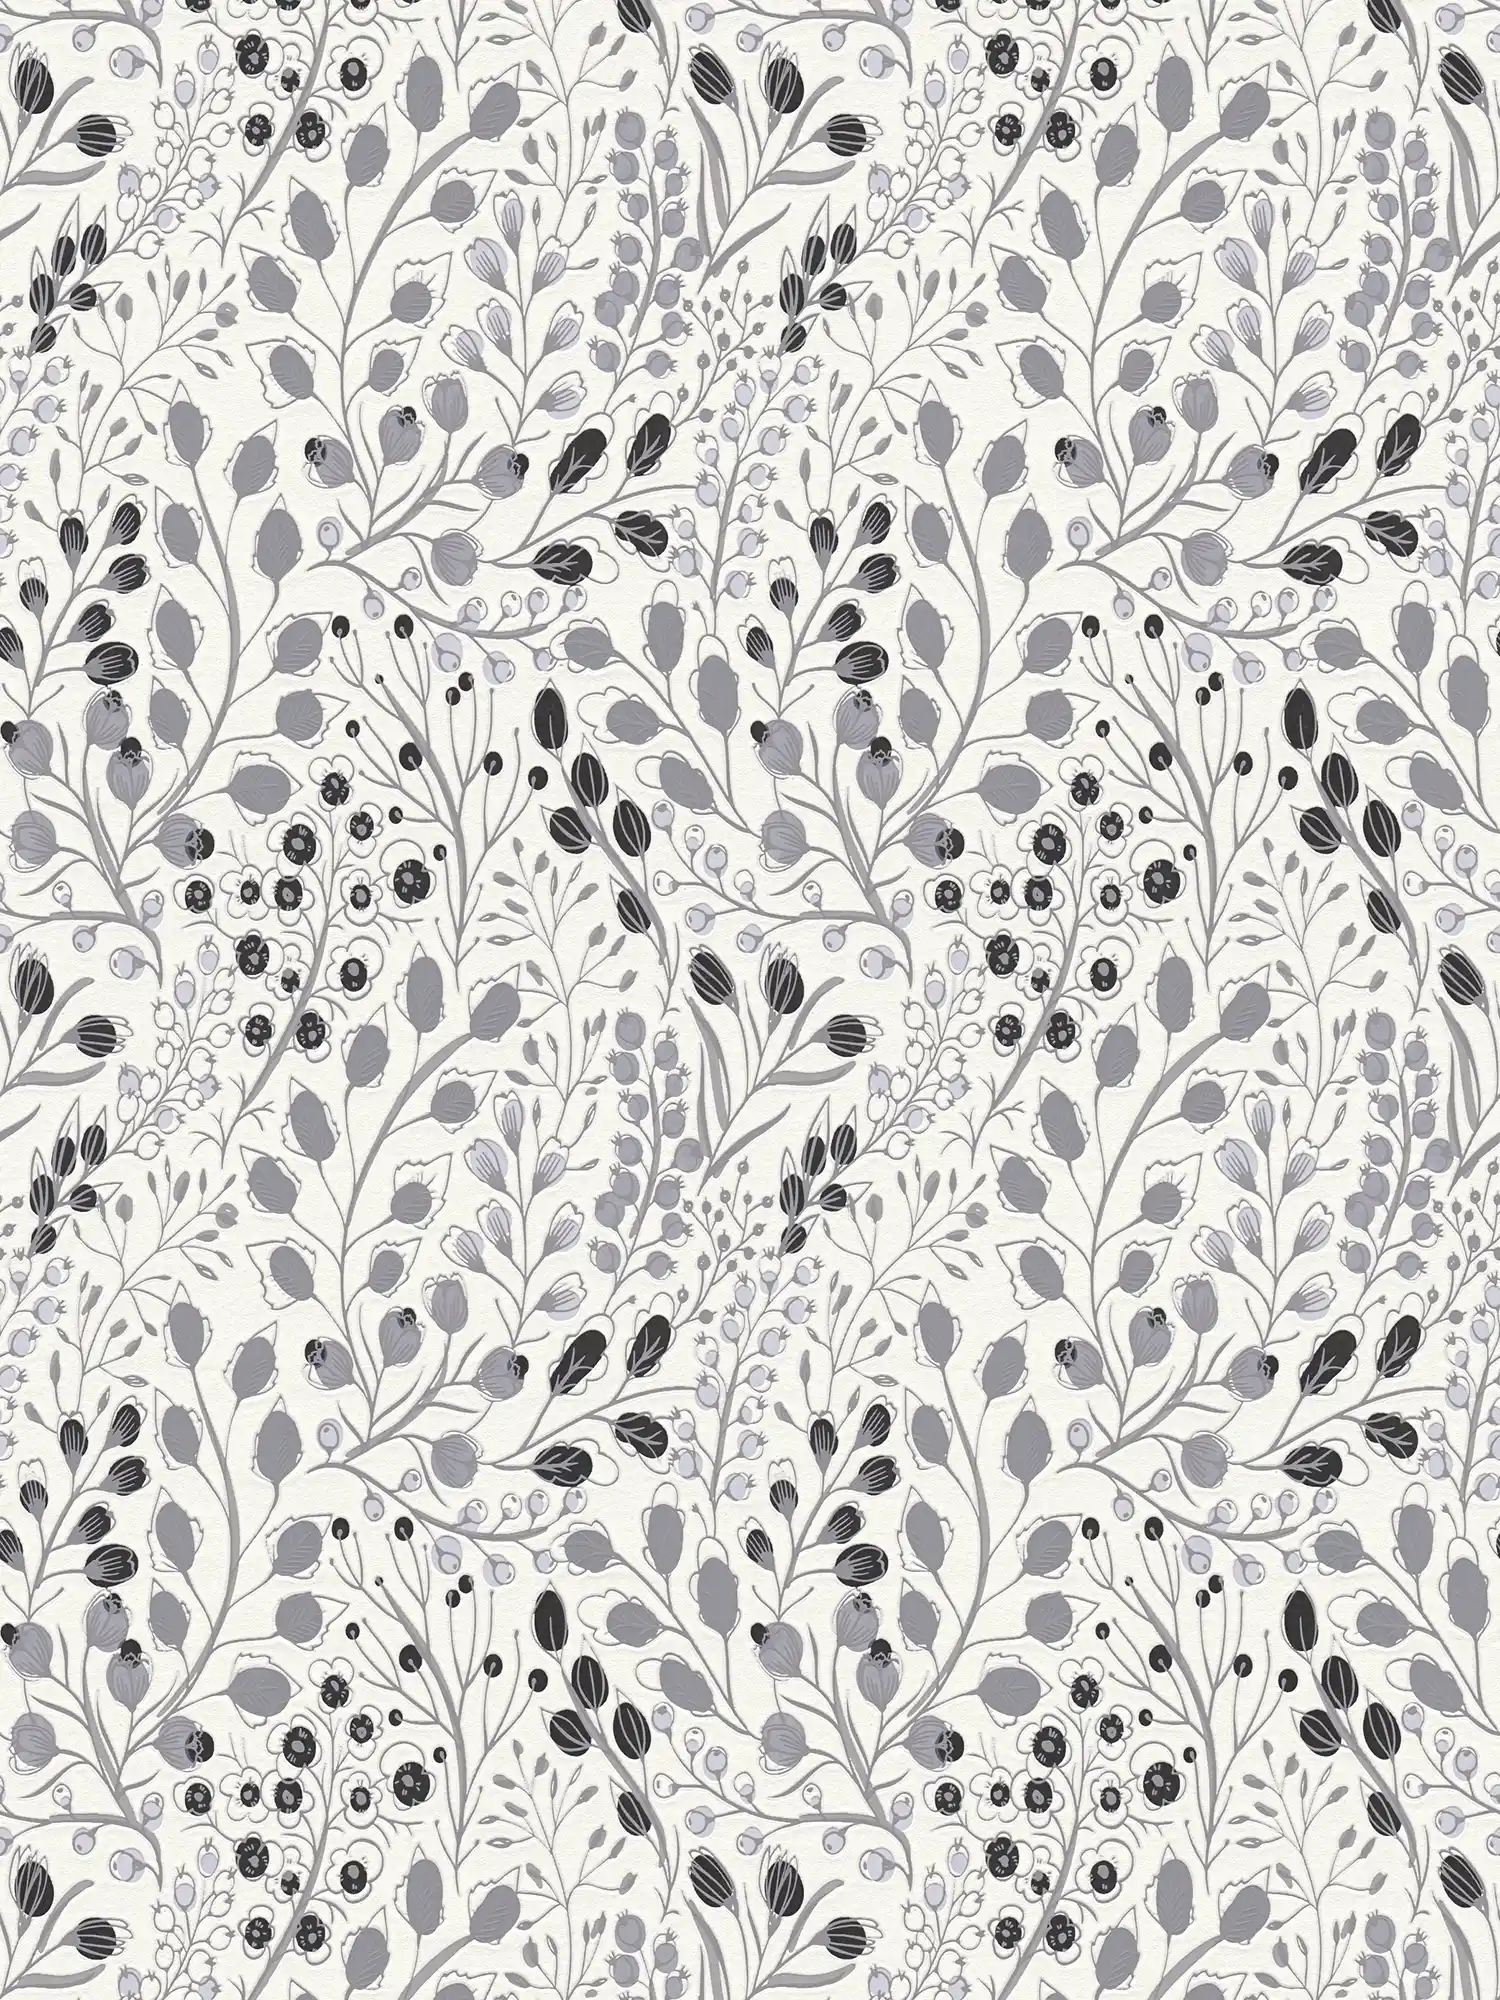 Abstract floral wallpaper in drawing style matt - grey, white, black
